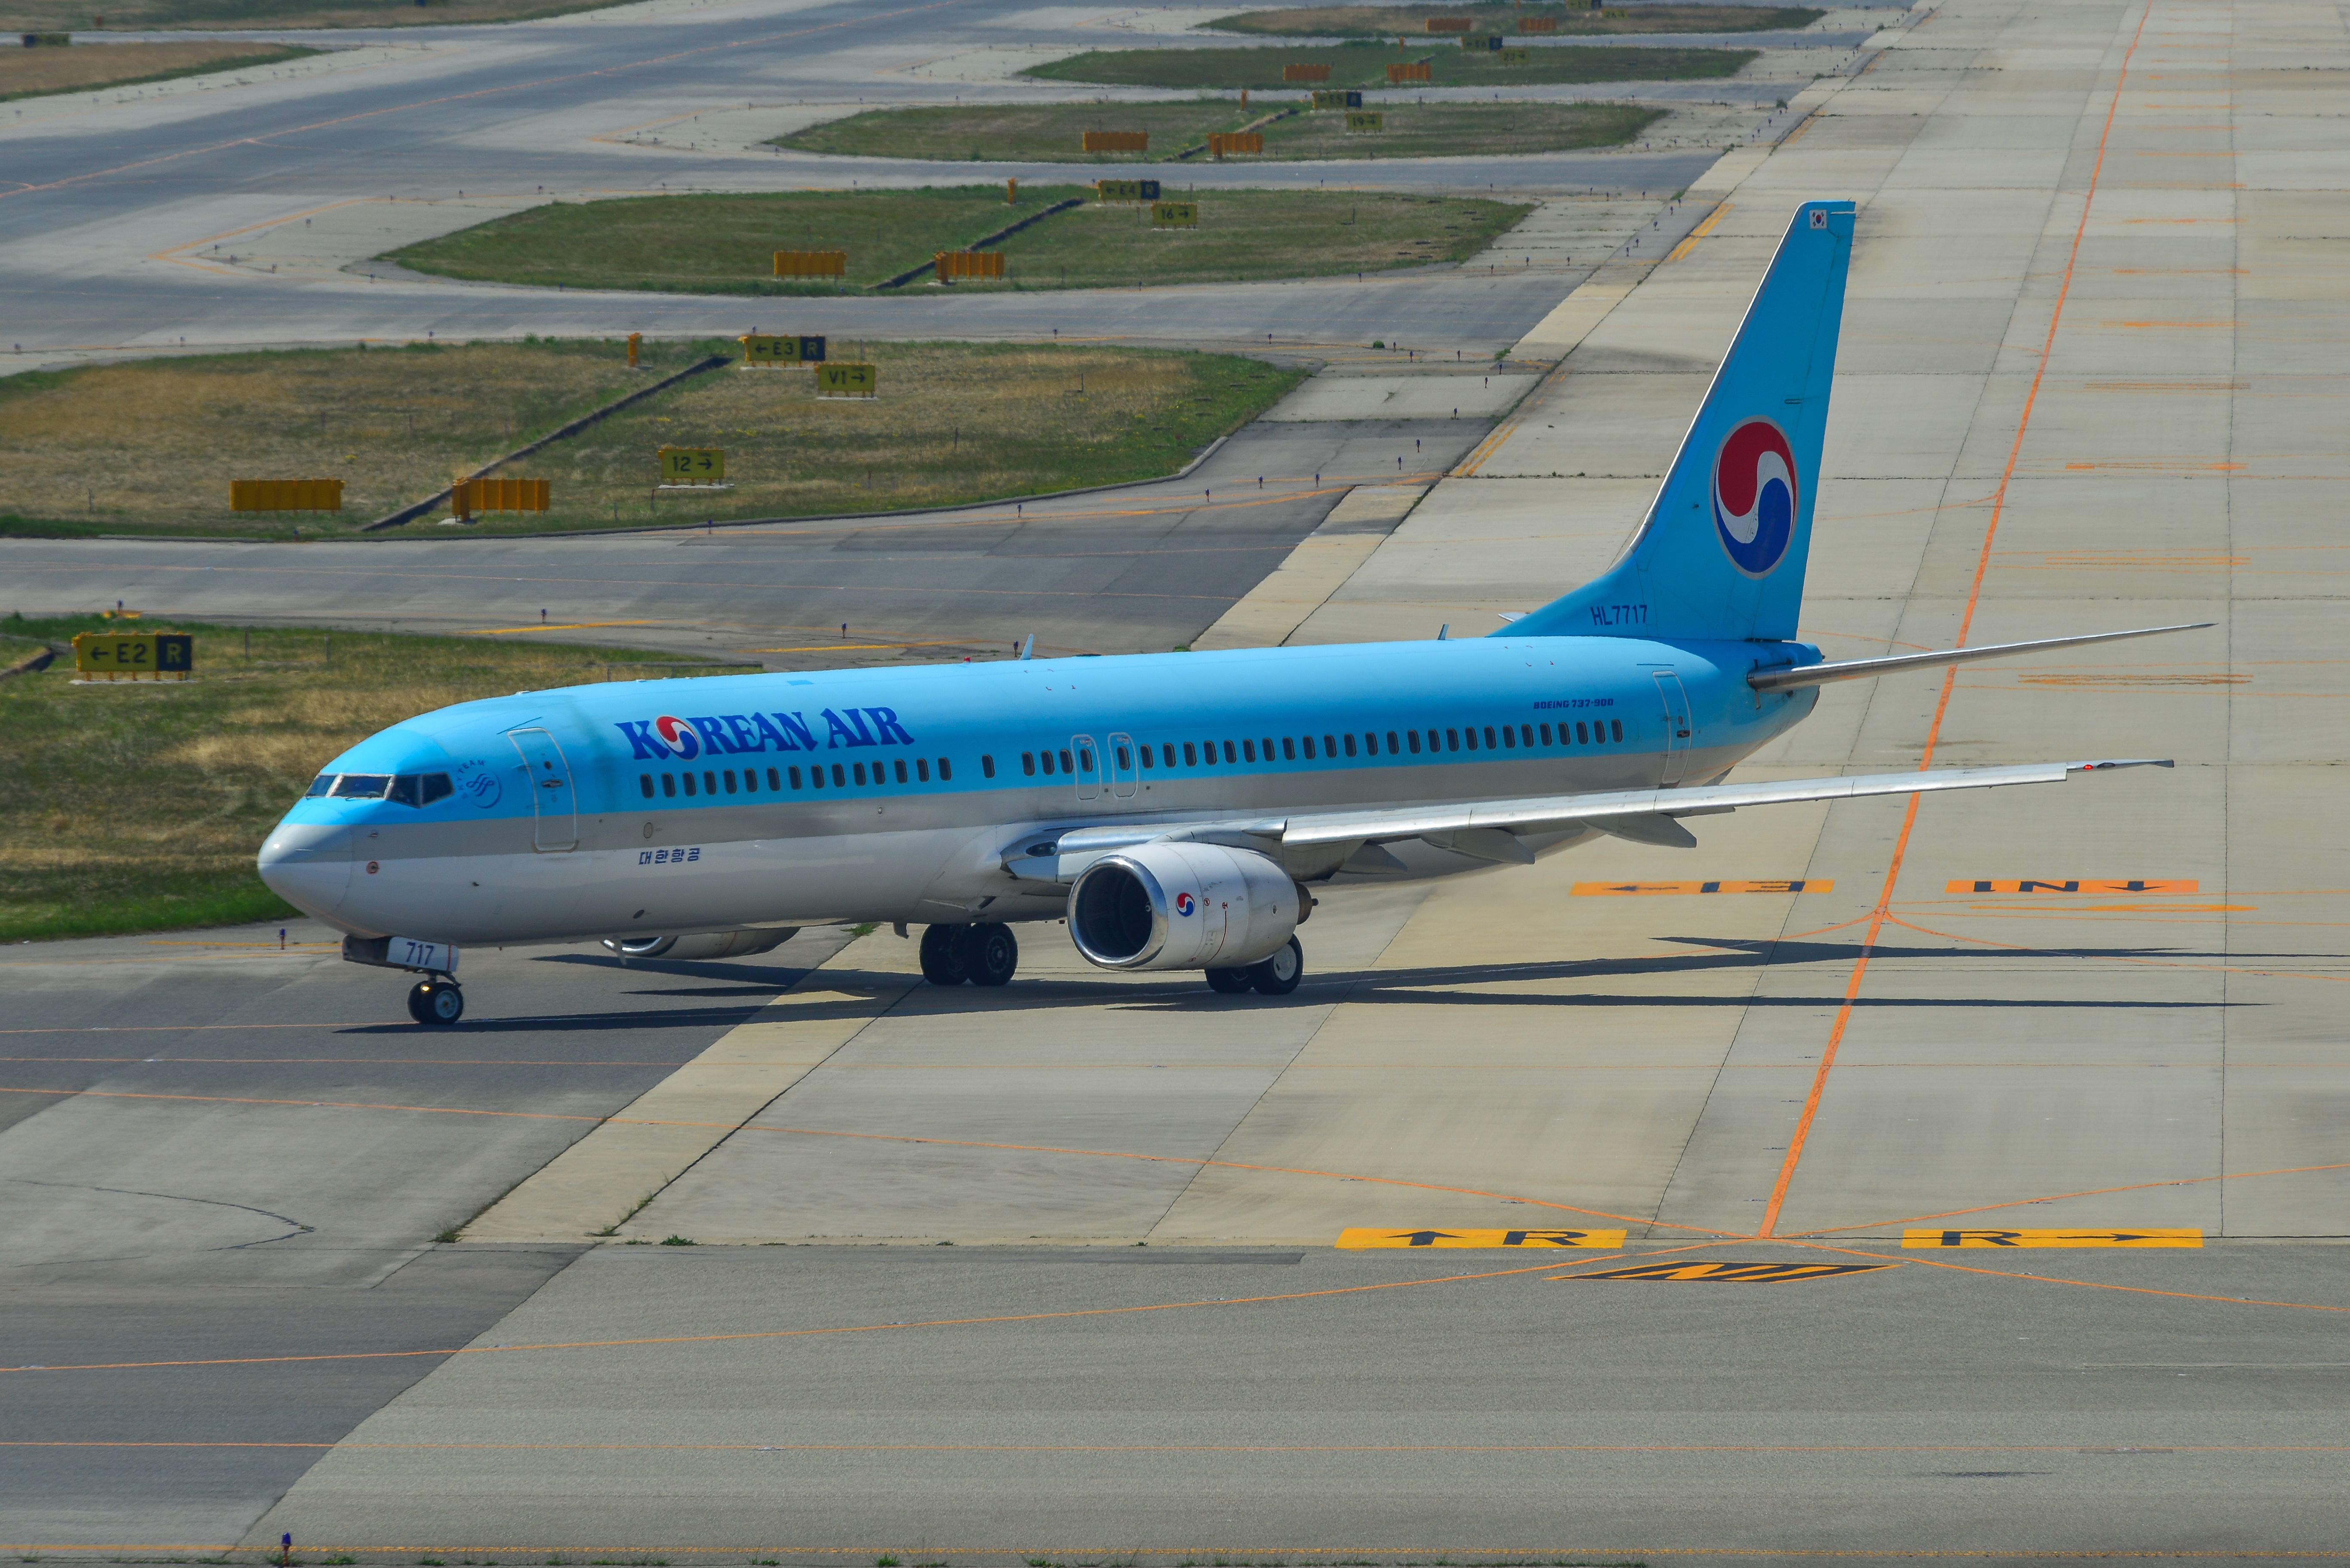 A Korean Air Boeing 737-900 On the apron In Osaka.